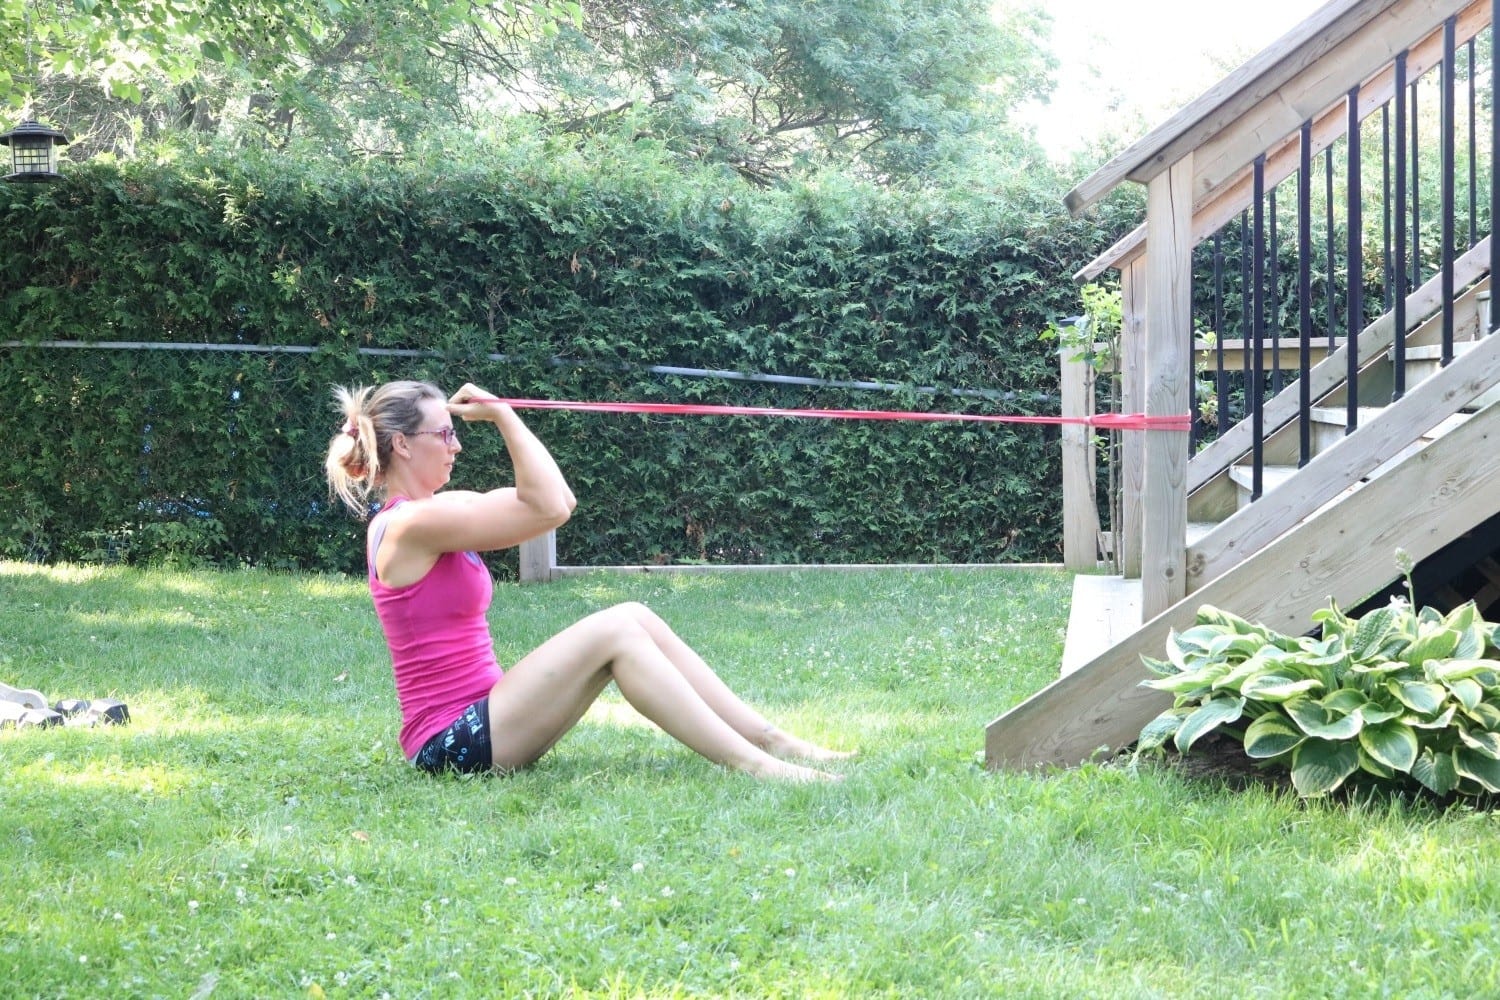 women in pink shirt and black shorts sitting on grass doing a bicep curl with a red resistance band